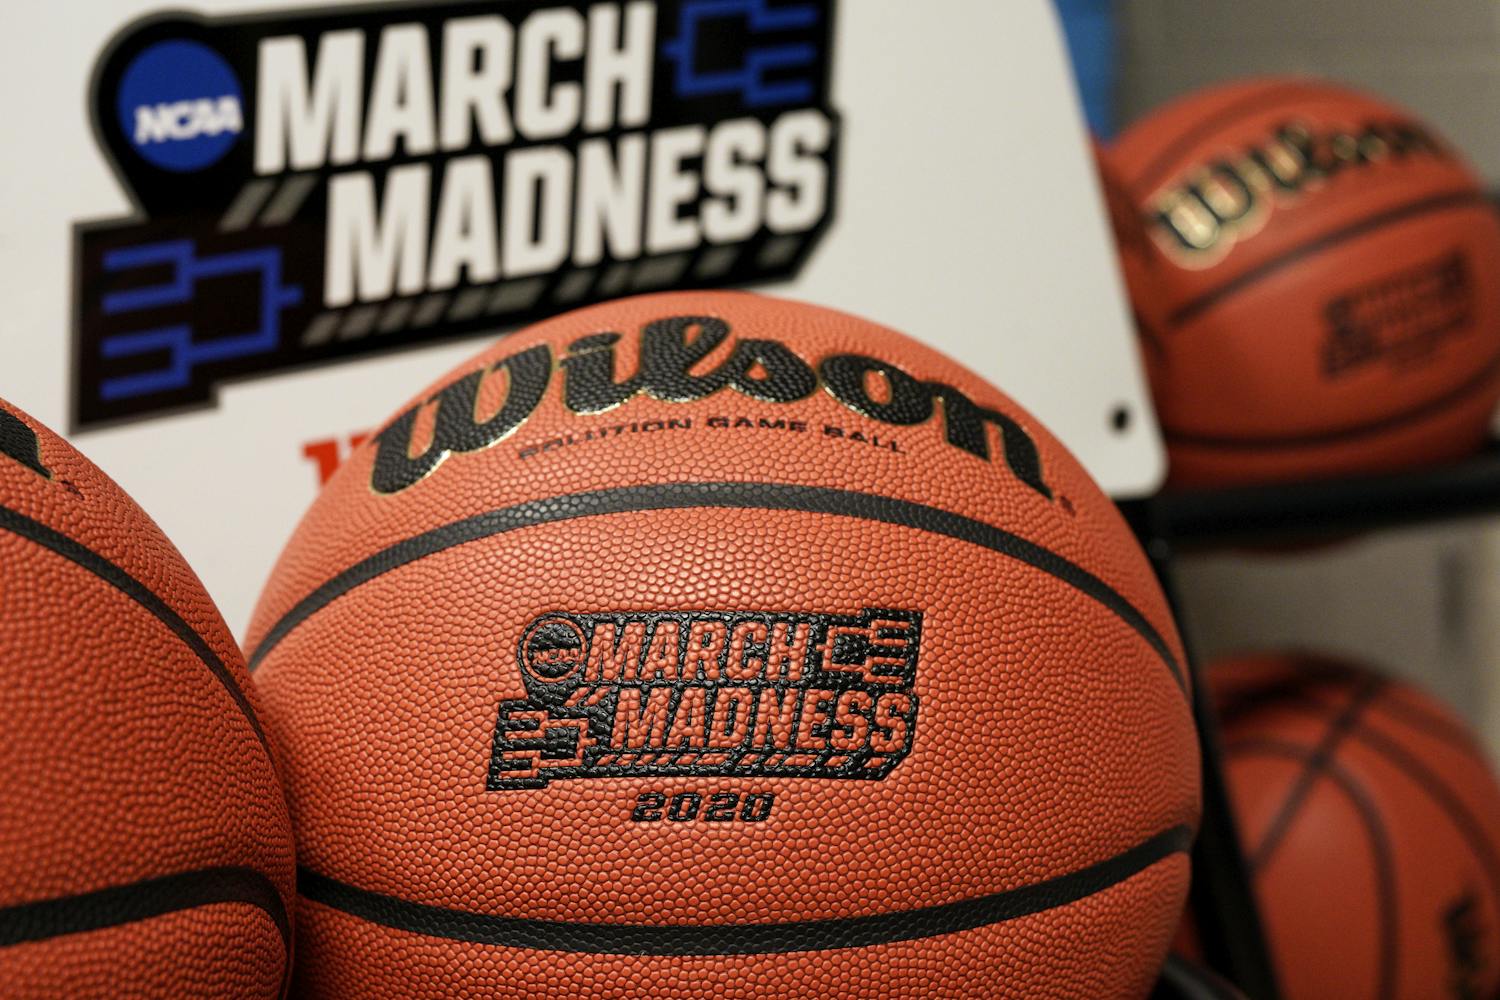 Official March Madness 2020 tournament basketballs are seen in a store room at the CHI Health Center Arena, in Omaha, Neb., Monday, March 16, 2020.